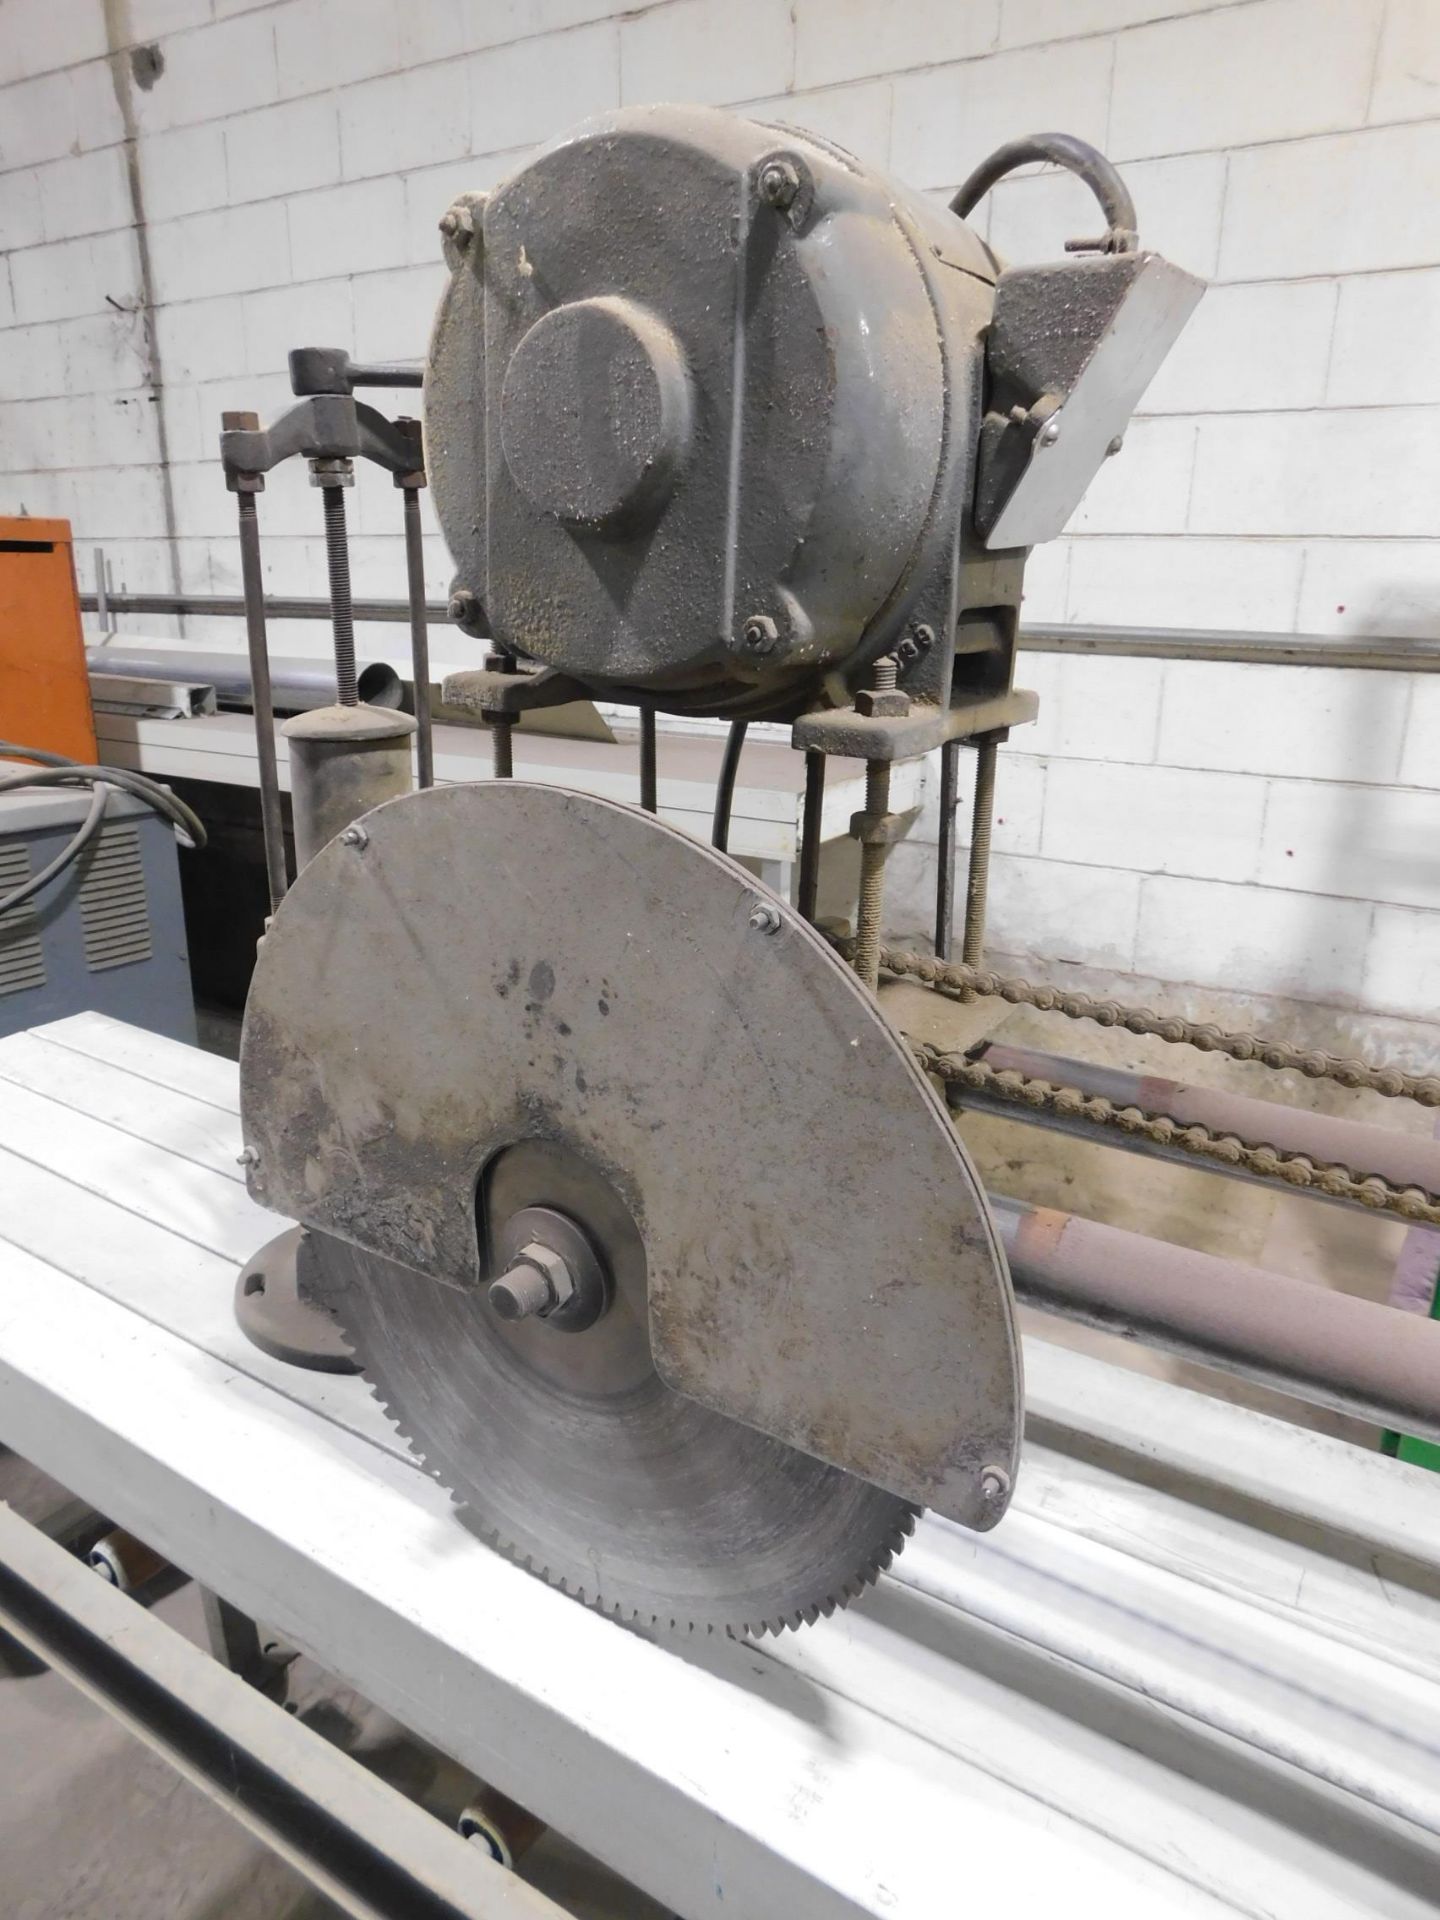 Hand-Feed Panel Saw, 14" Diameter Blade, 54" Head Travel 7" Vertical Adjustment, 1 1/2HP, 3 phs. - Image 2 of 7